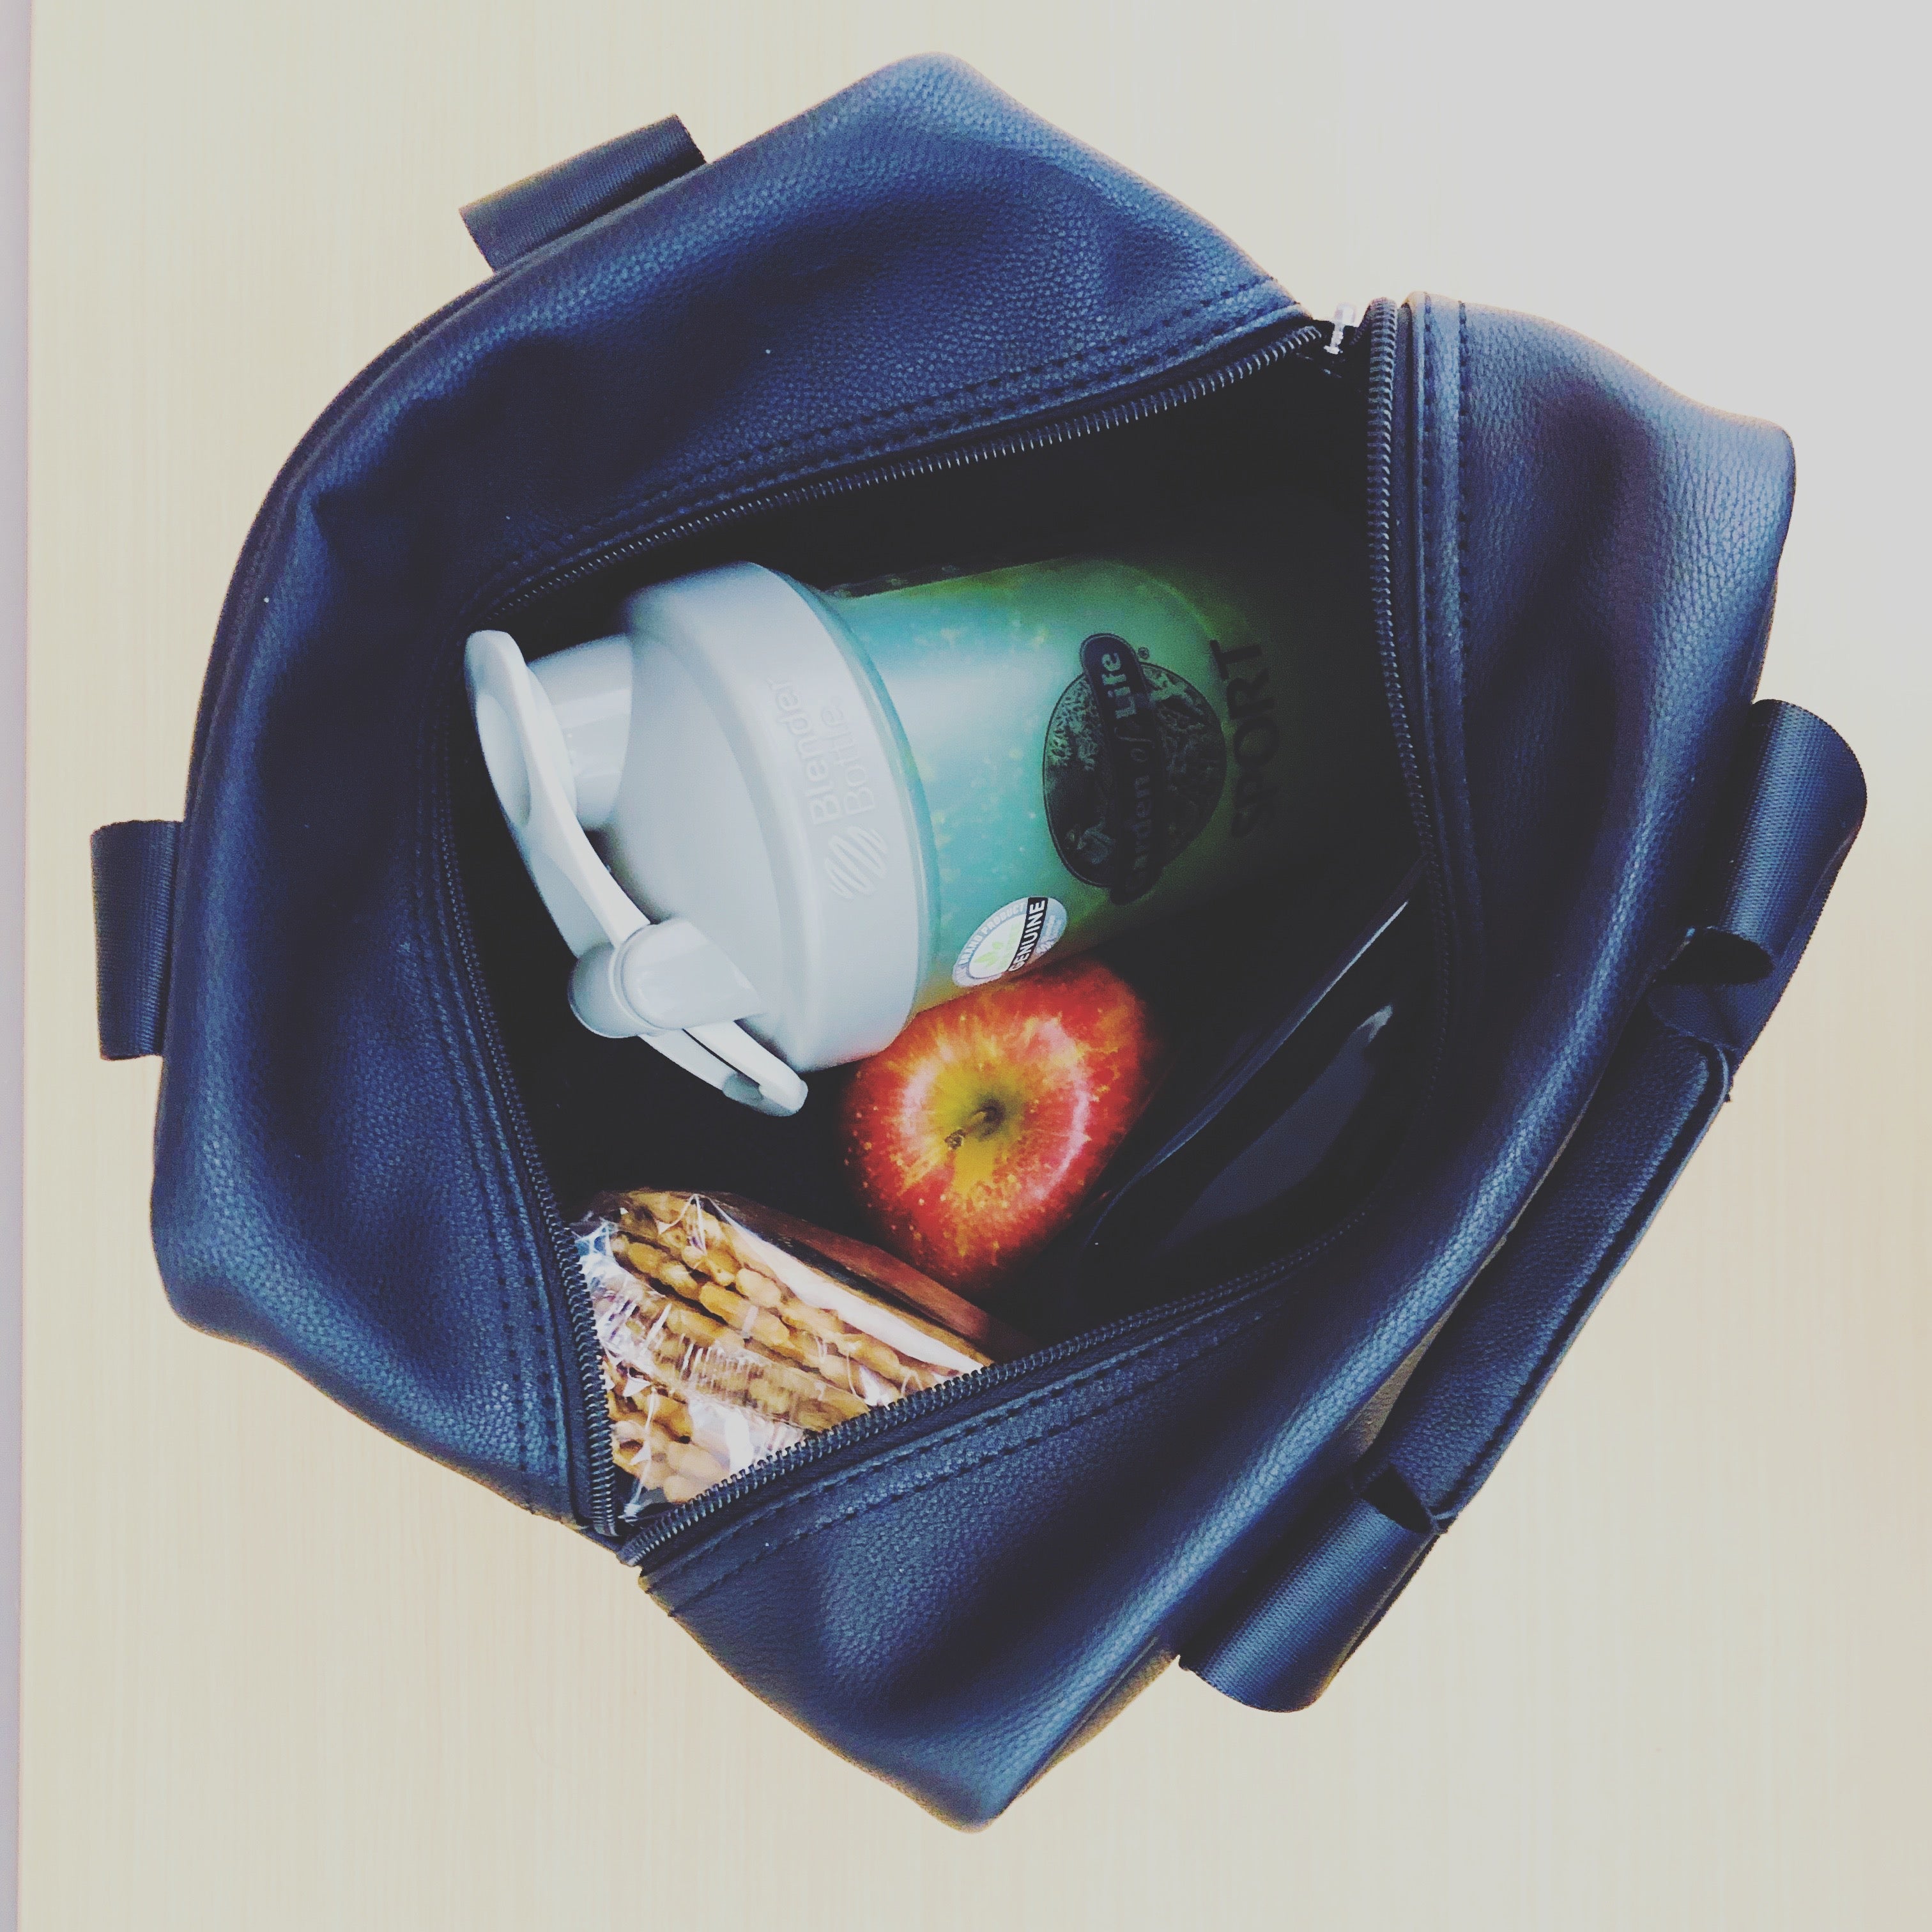 top view of an open T|W lunch tote with crackers, an apple and resusable water bottle